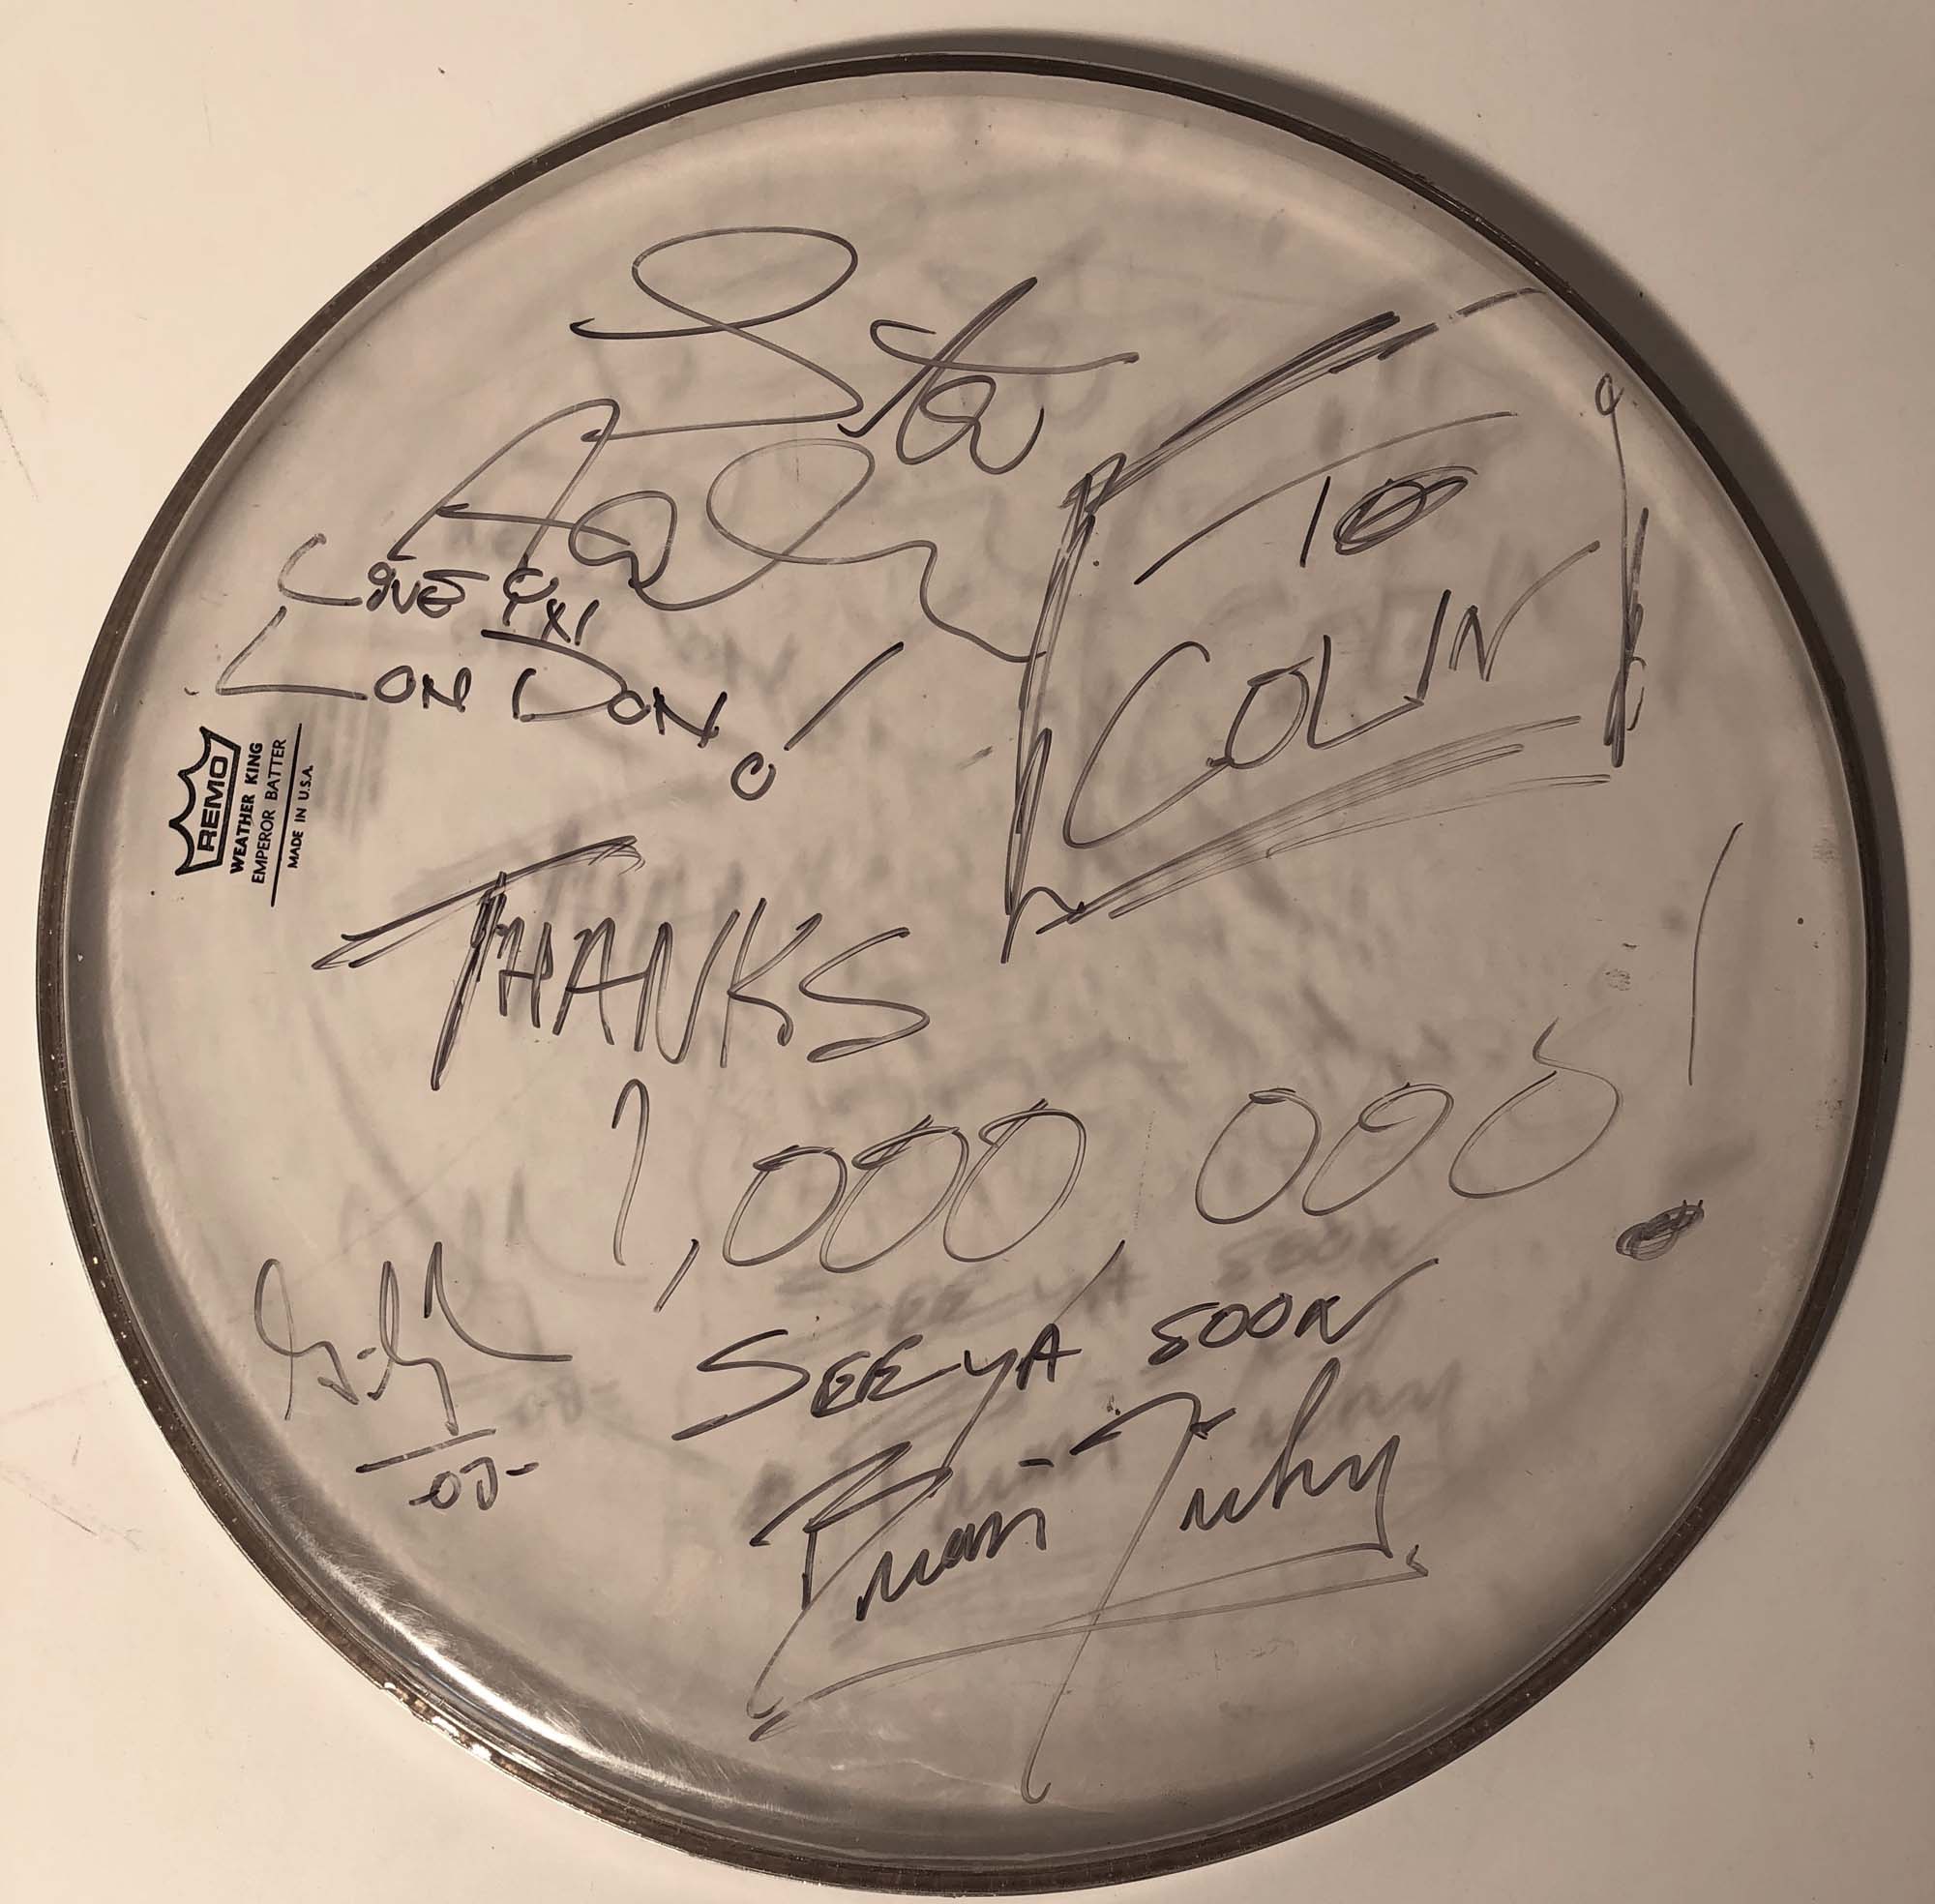 SIGNED DRUM SKINS/METAL BANDS PROMO ITEMS. - Image 5 of 6